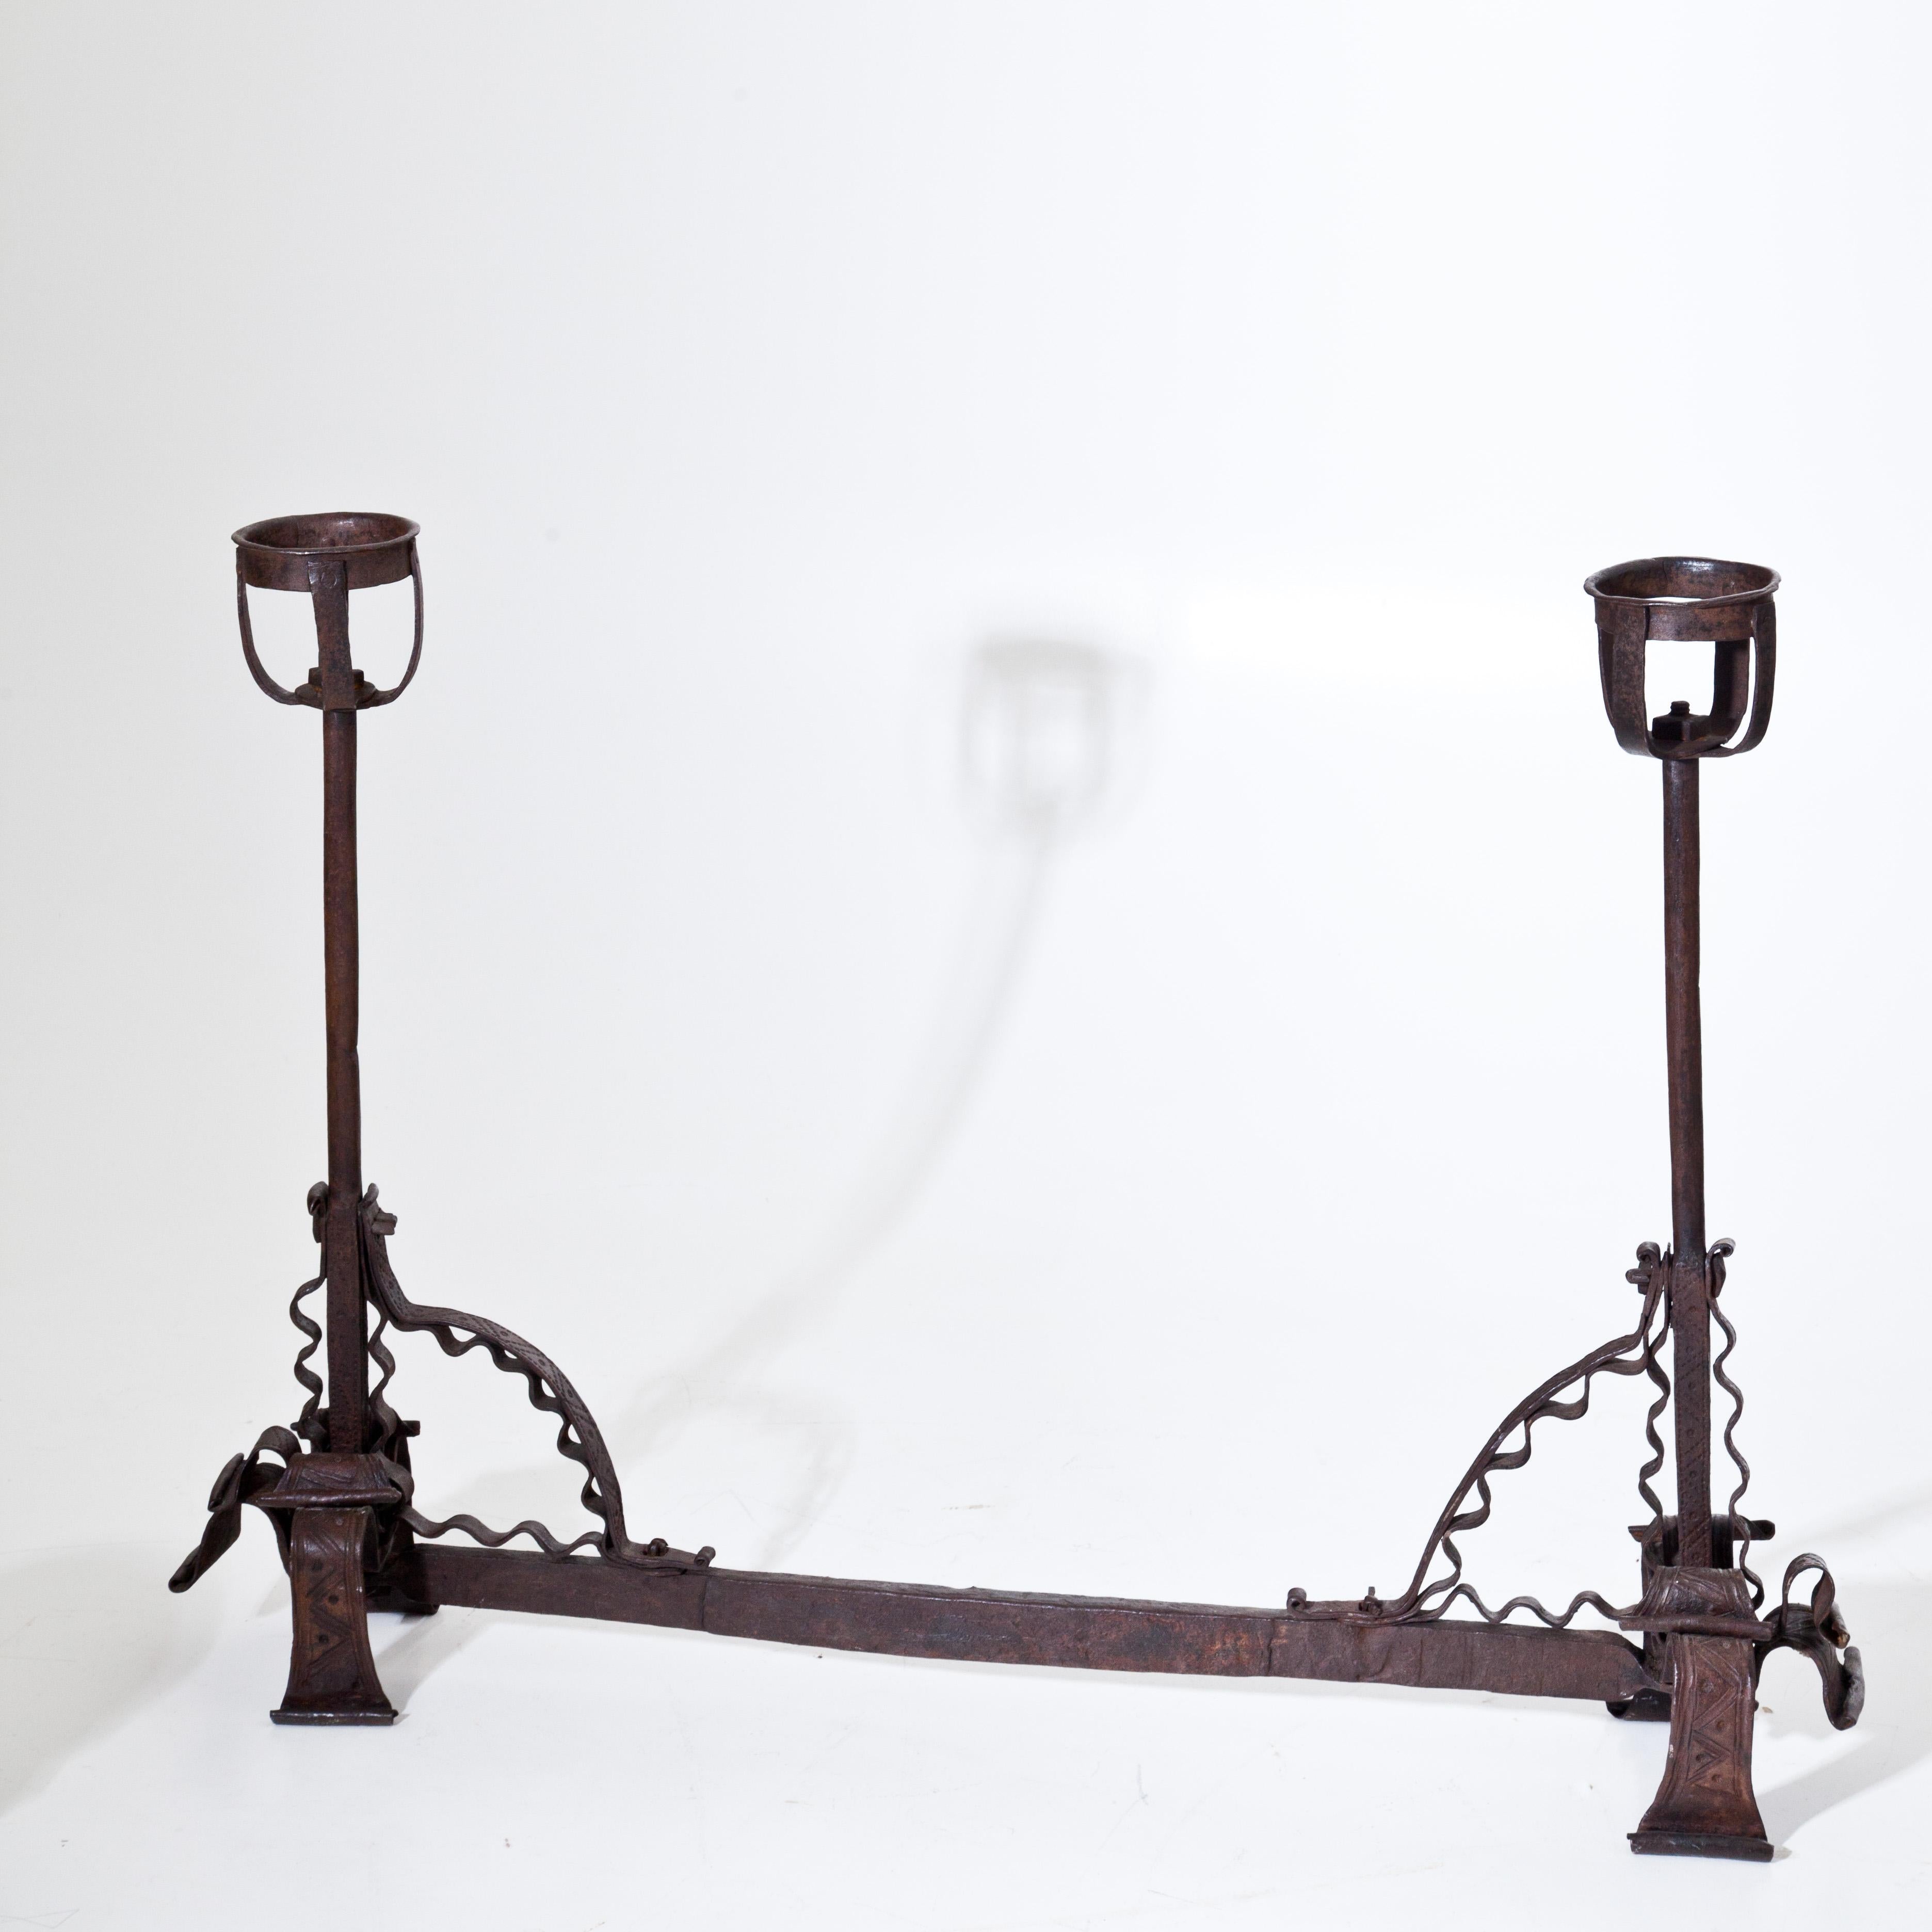 Iron andiron or fire dog with wavy bands and two sockets on the left and right. Beautiful age-appropriate patina.
 